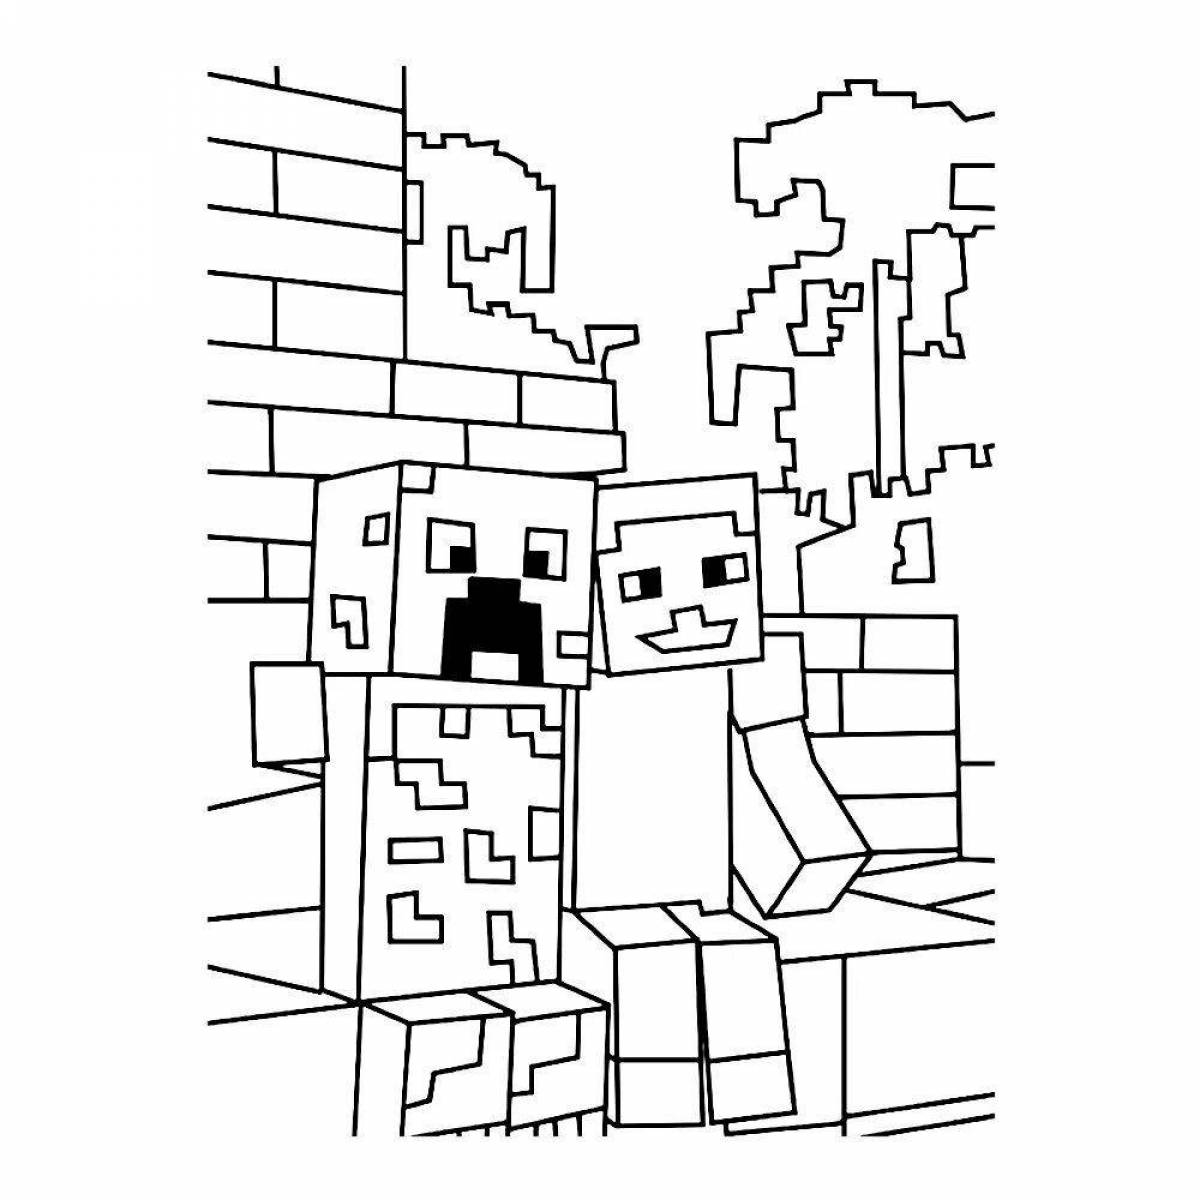 Coloring dazzling minecraft house